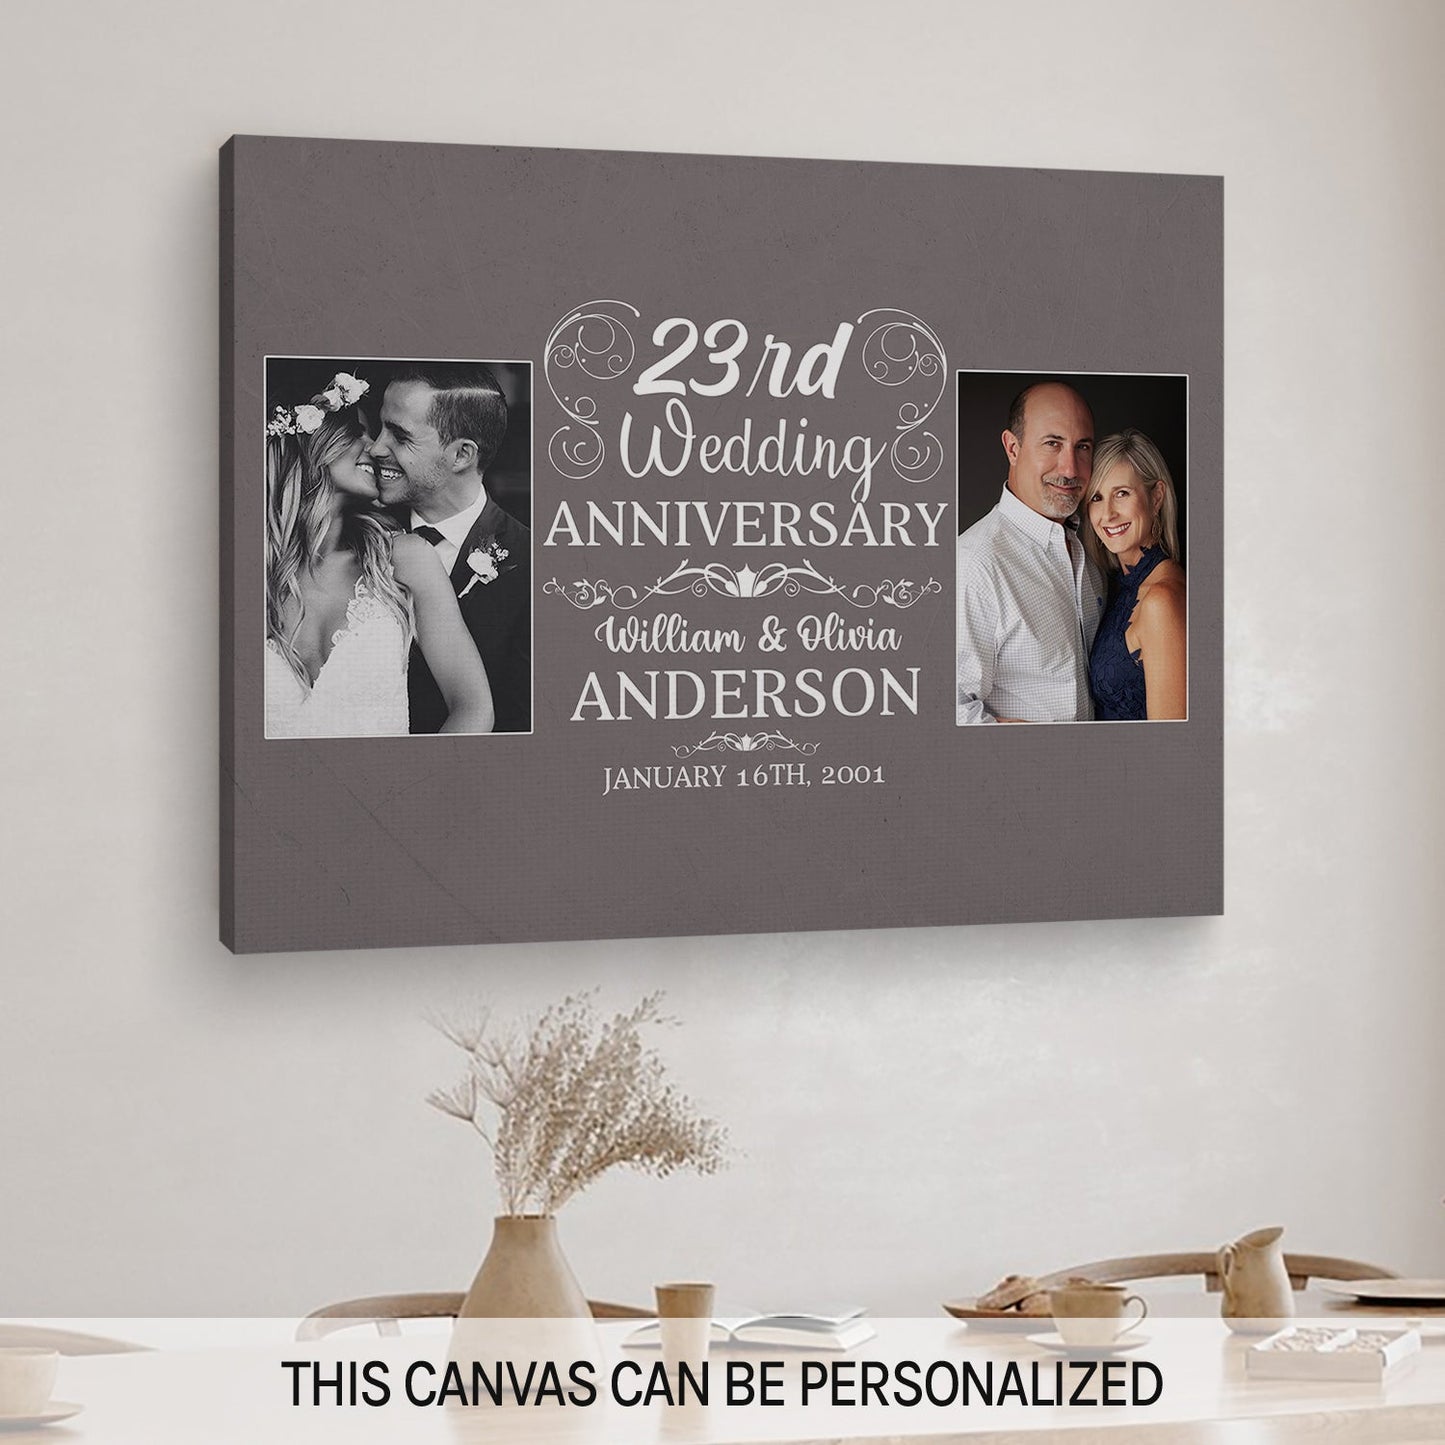 23rd Wedding Anniversary - Personalized 23 Year Anniversary gift For Parents, Husband or Wife - Custom Canvas Print - MyMindfulGifts